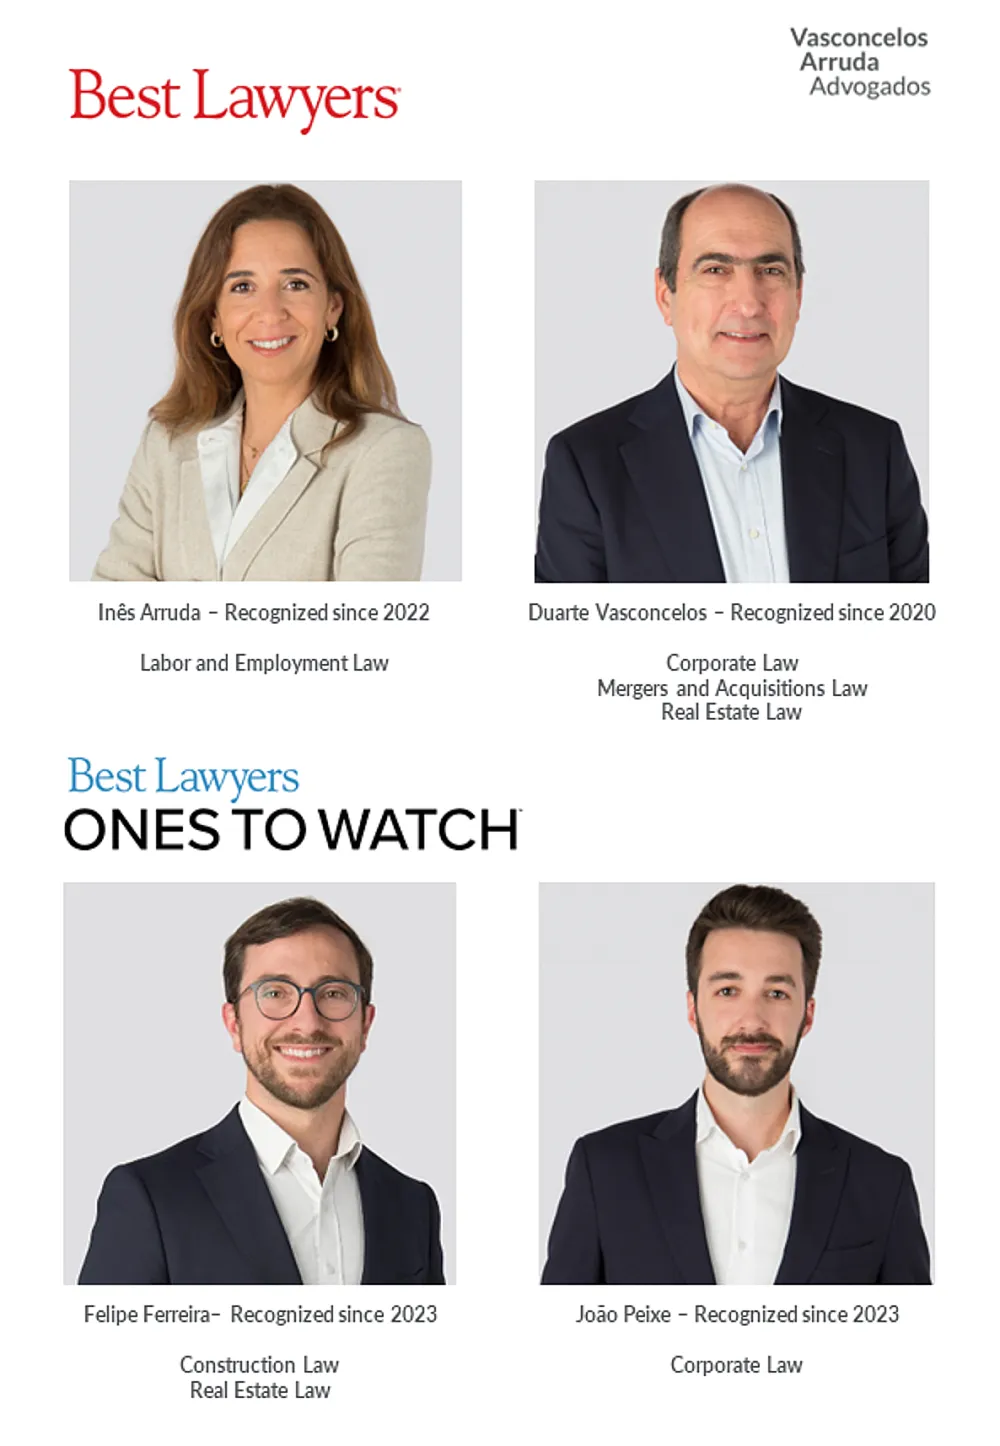 Vasconcelos Arruda recognised by Best Lawyers Directory